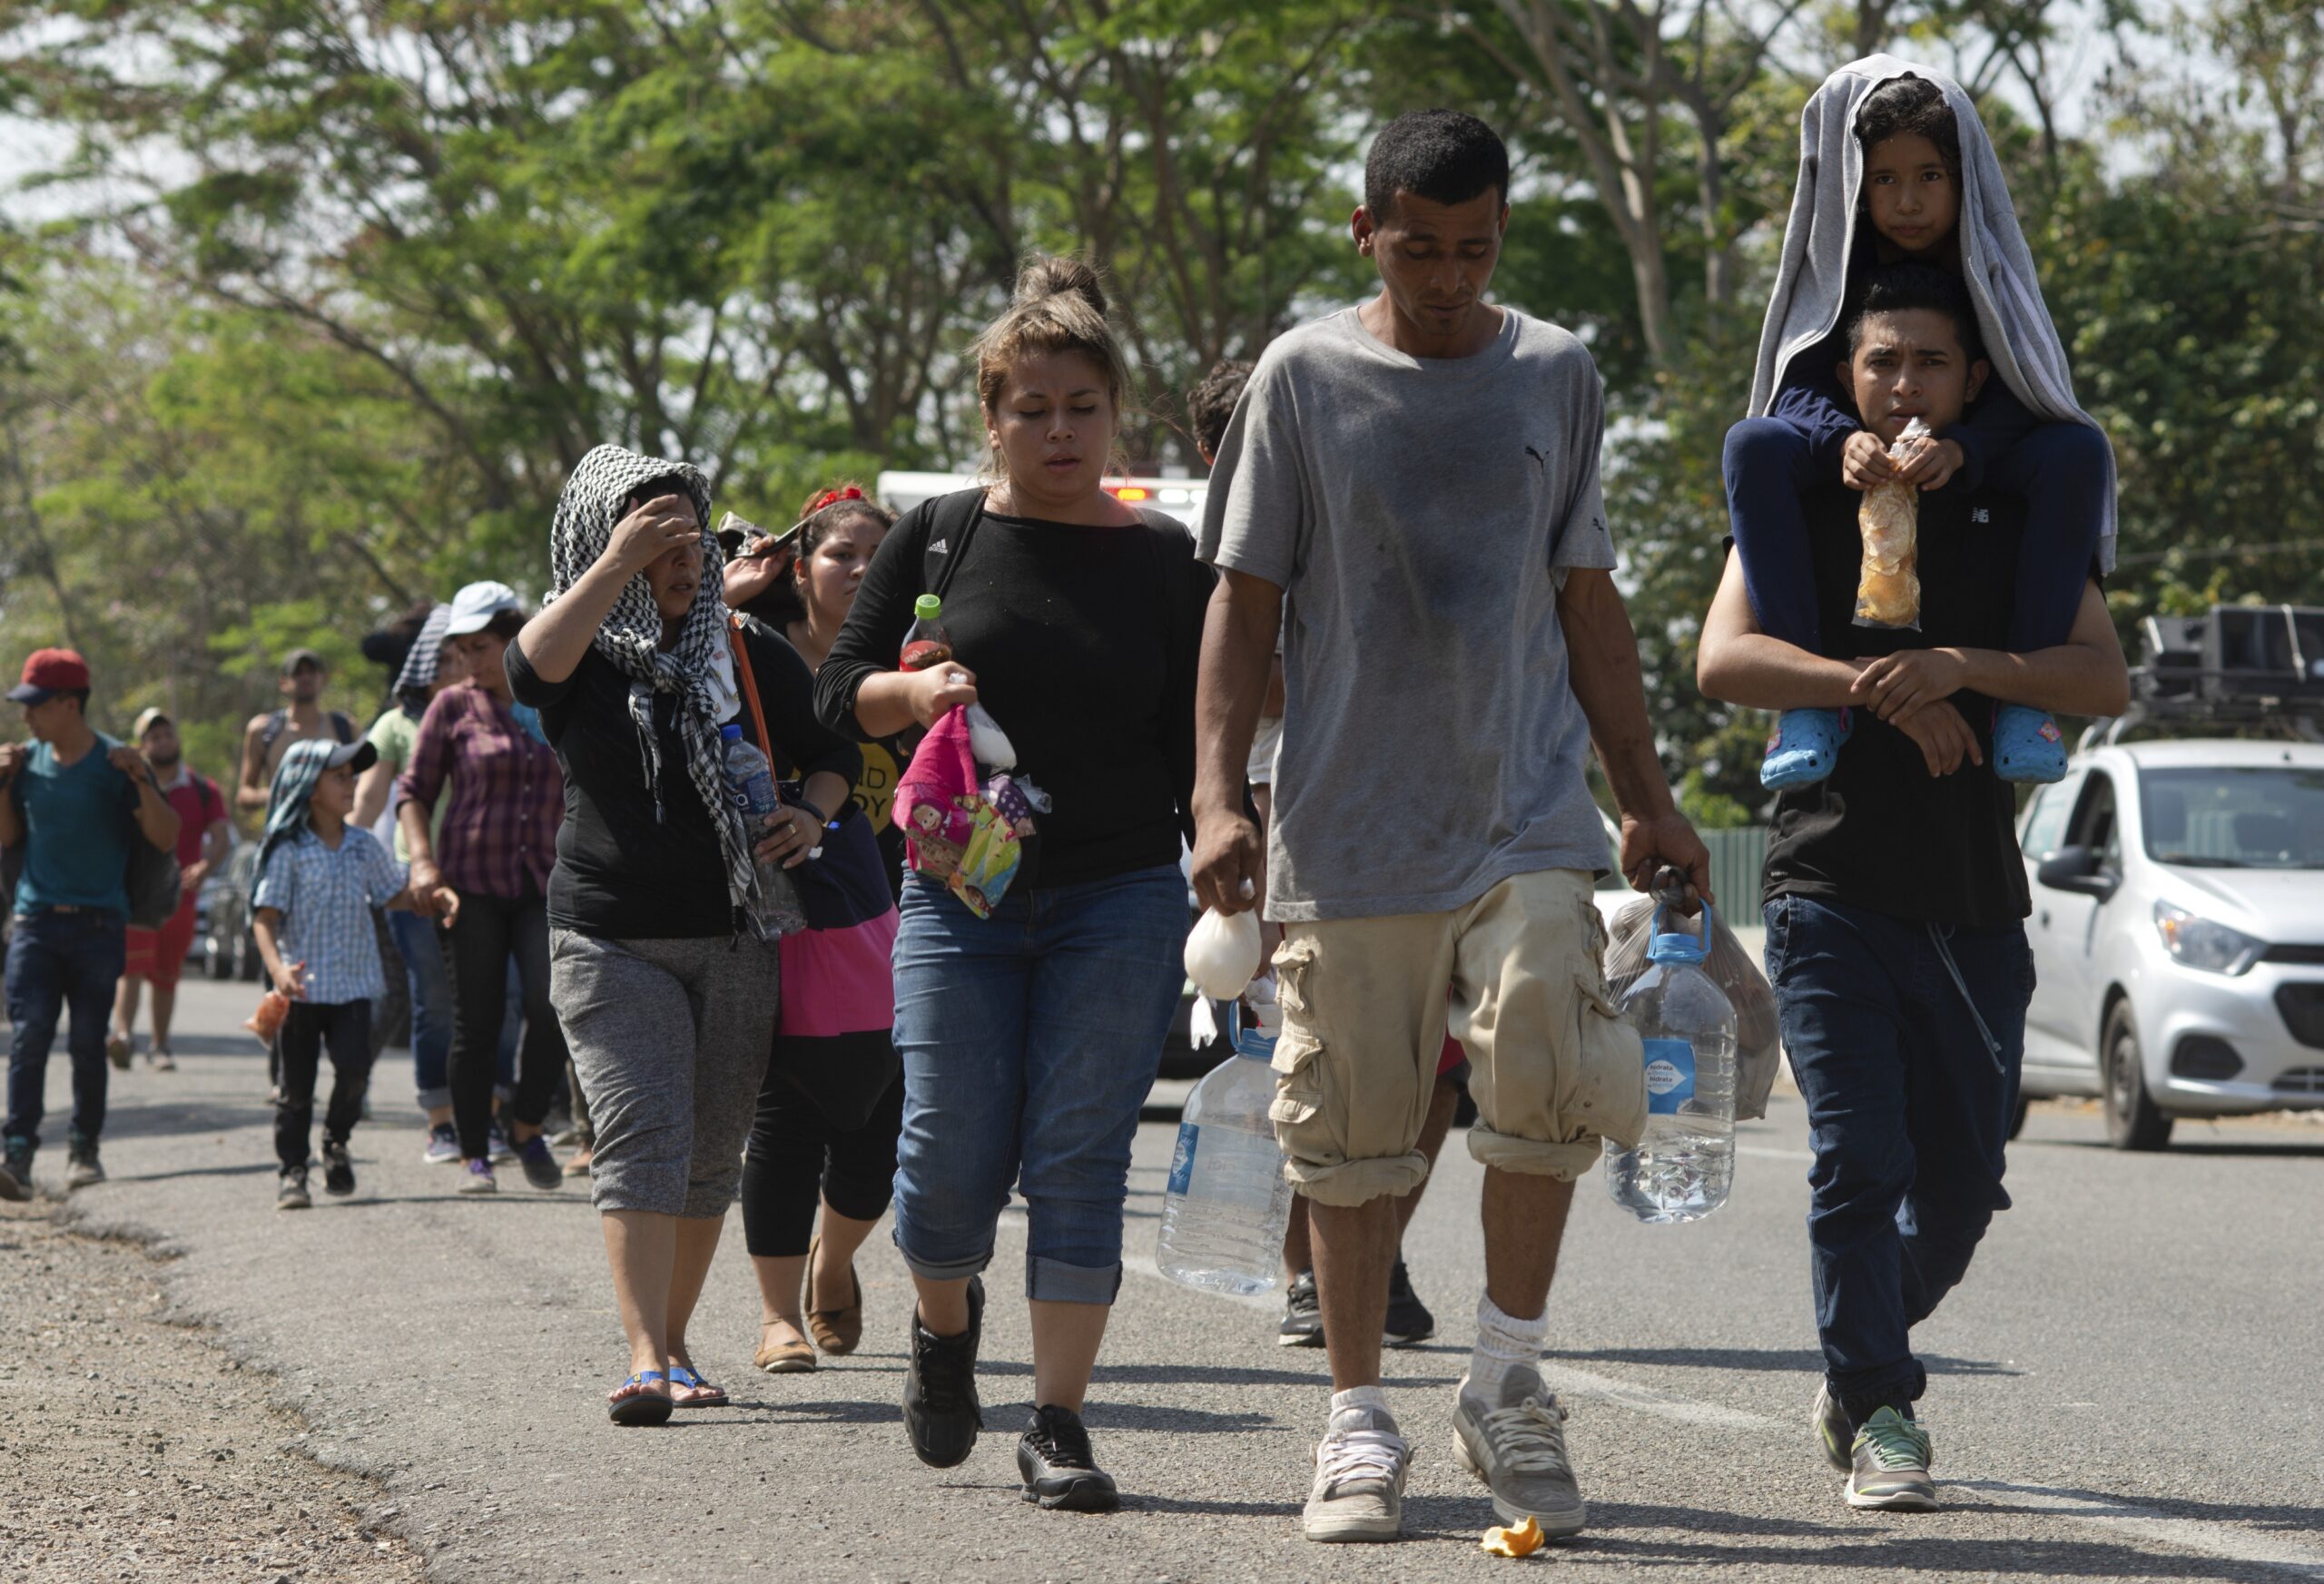 Central American migrants, part of the caravan hoping to reach the U.S. border